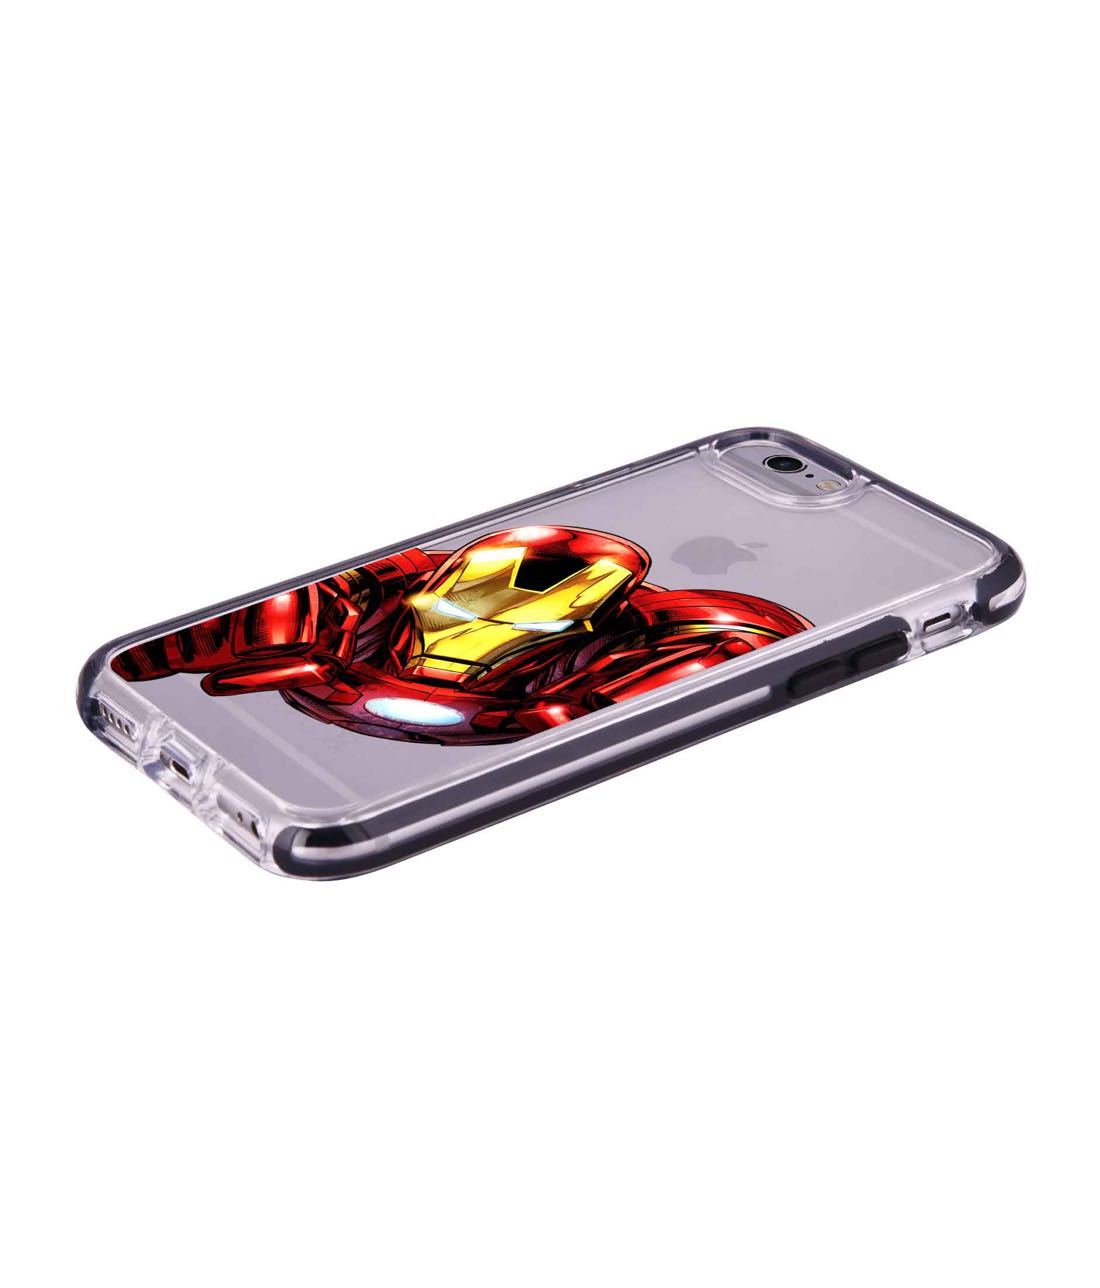 Ironvenger - Extreme Phone Case for iPhone 6 Plus